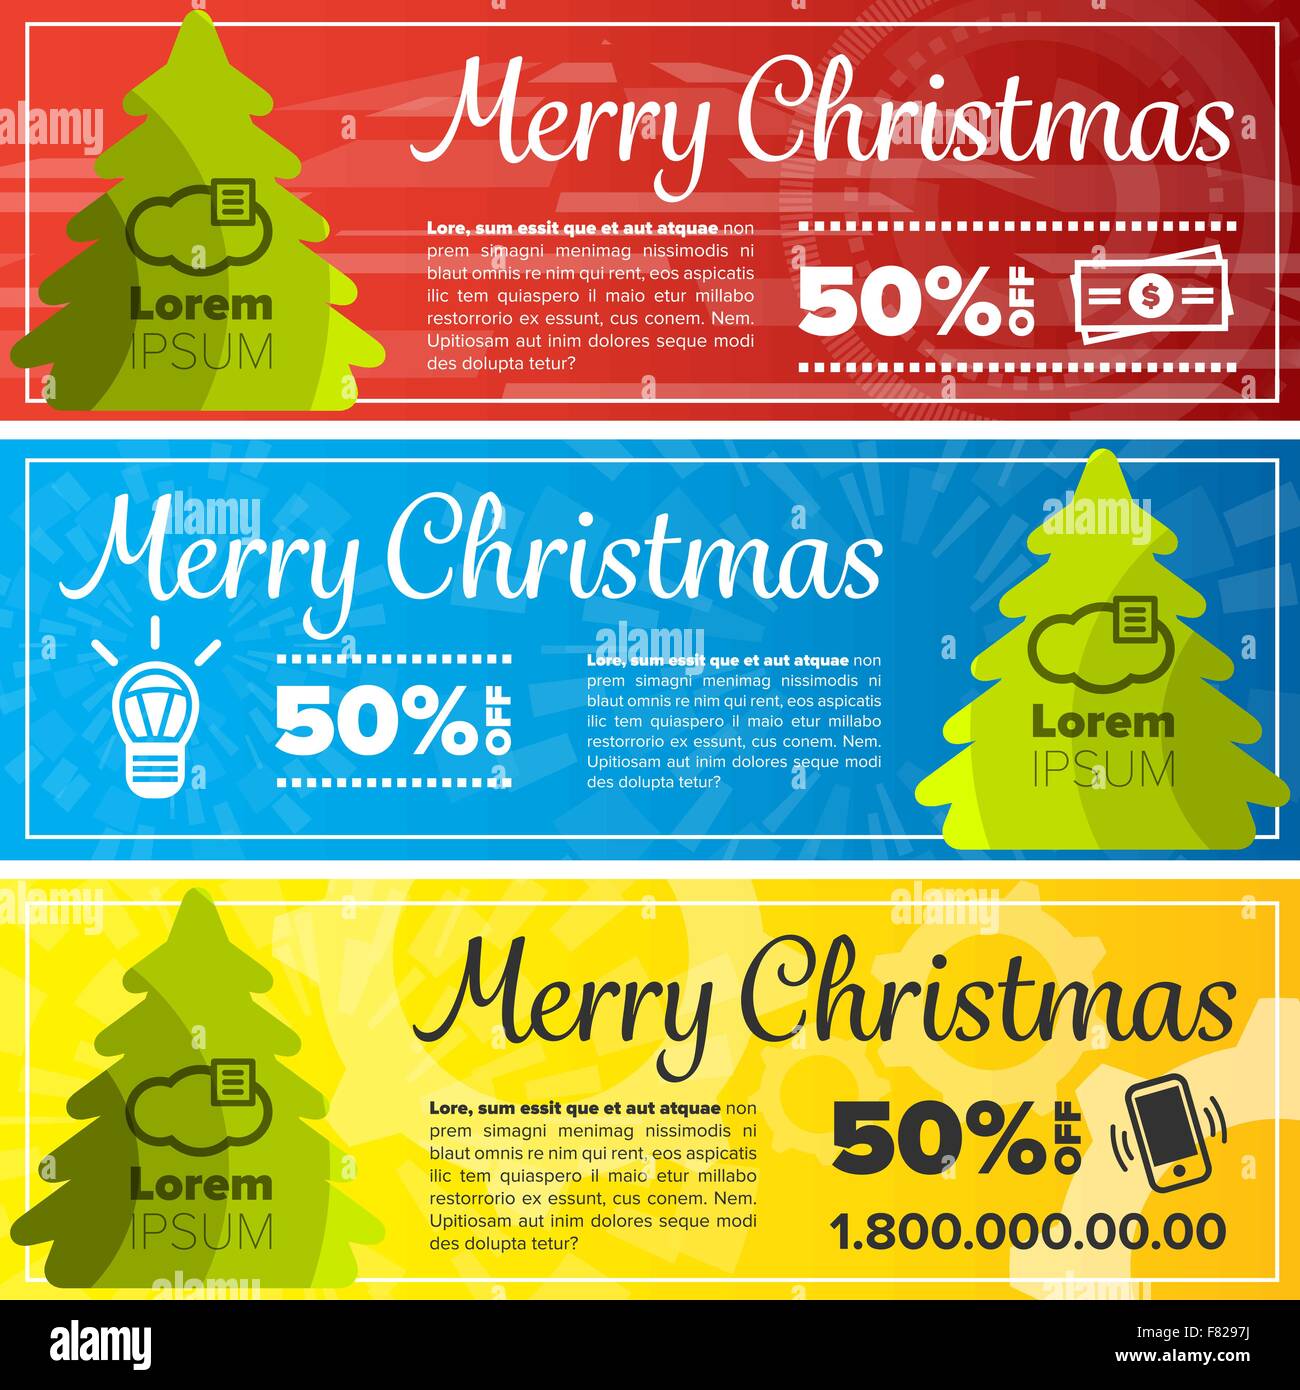 Merry Christmas Banners With Icons And Colored Backgrounds Stock Vector Image And Art Alamy 0417